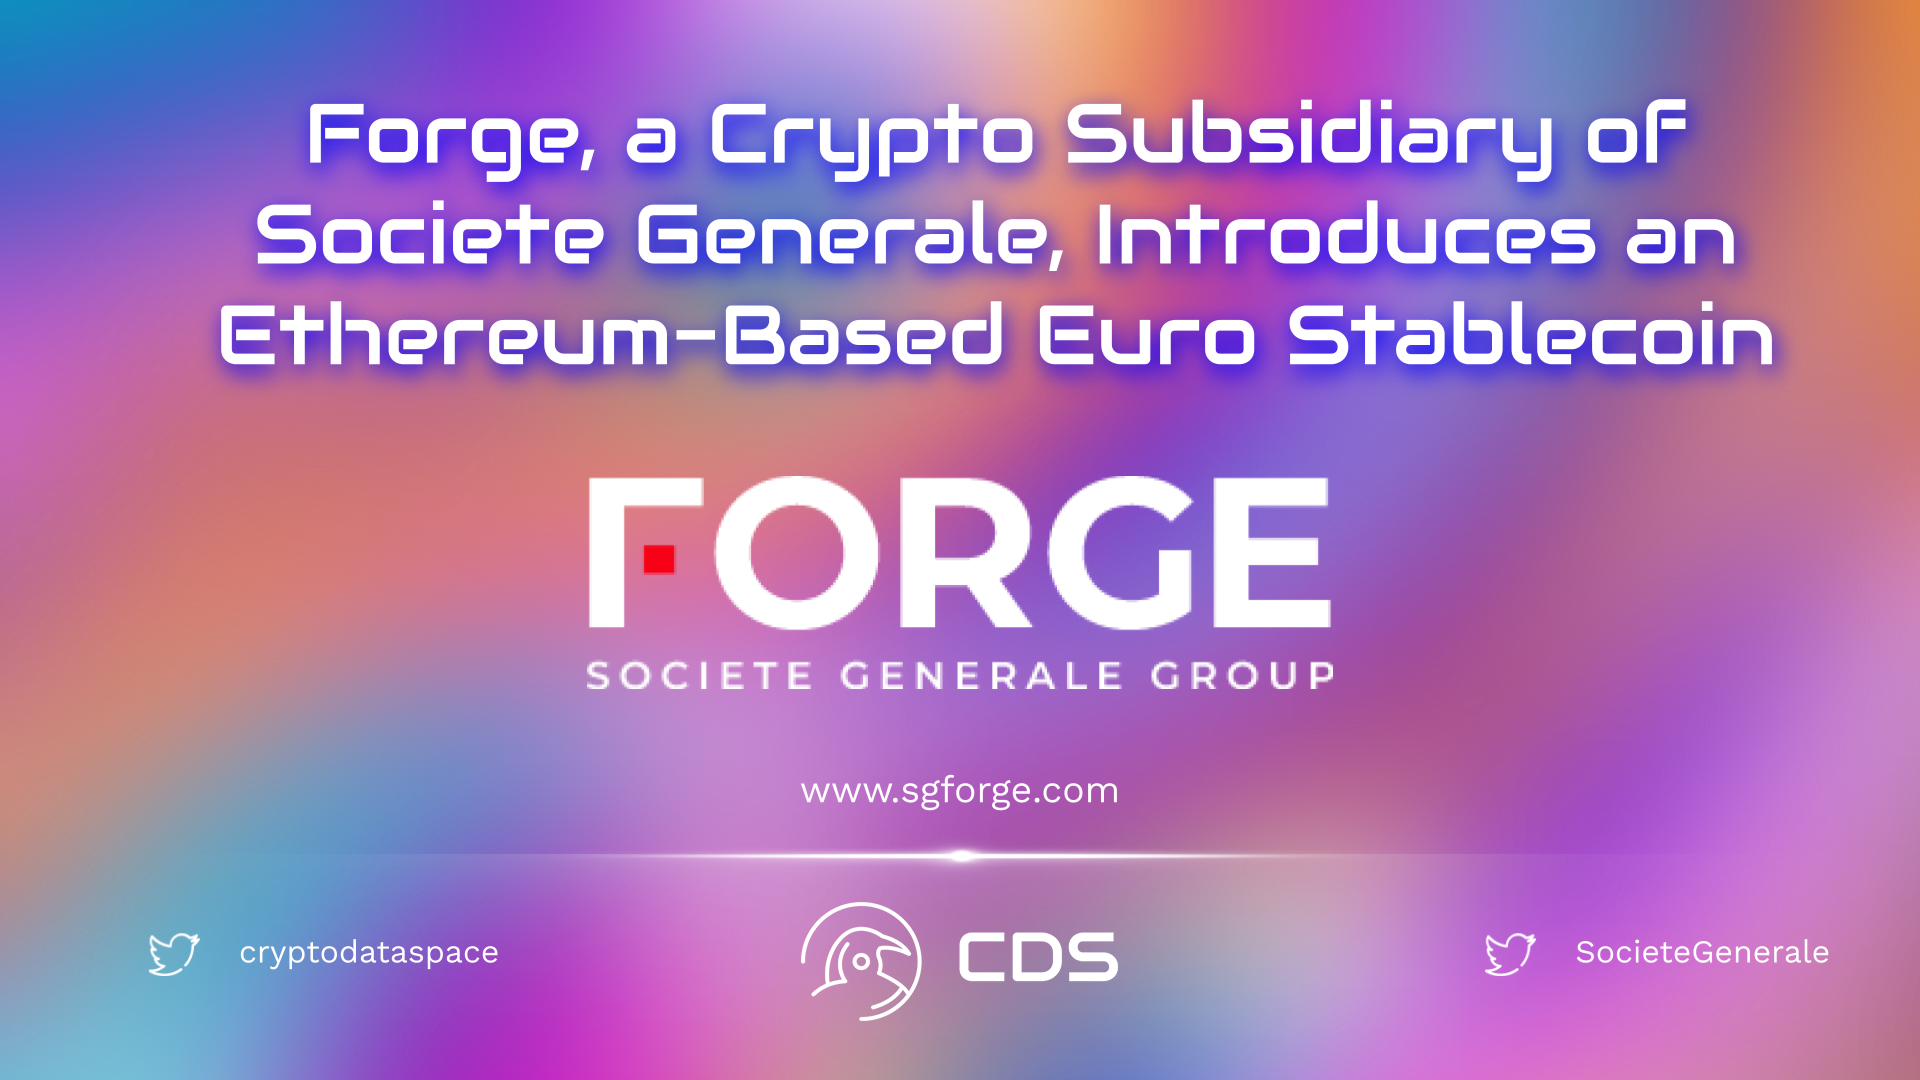 Forge, a Crypto Subsidiary of Societe Generale, Introduces an Ethereum-Based Euro Stablecoin